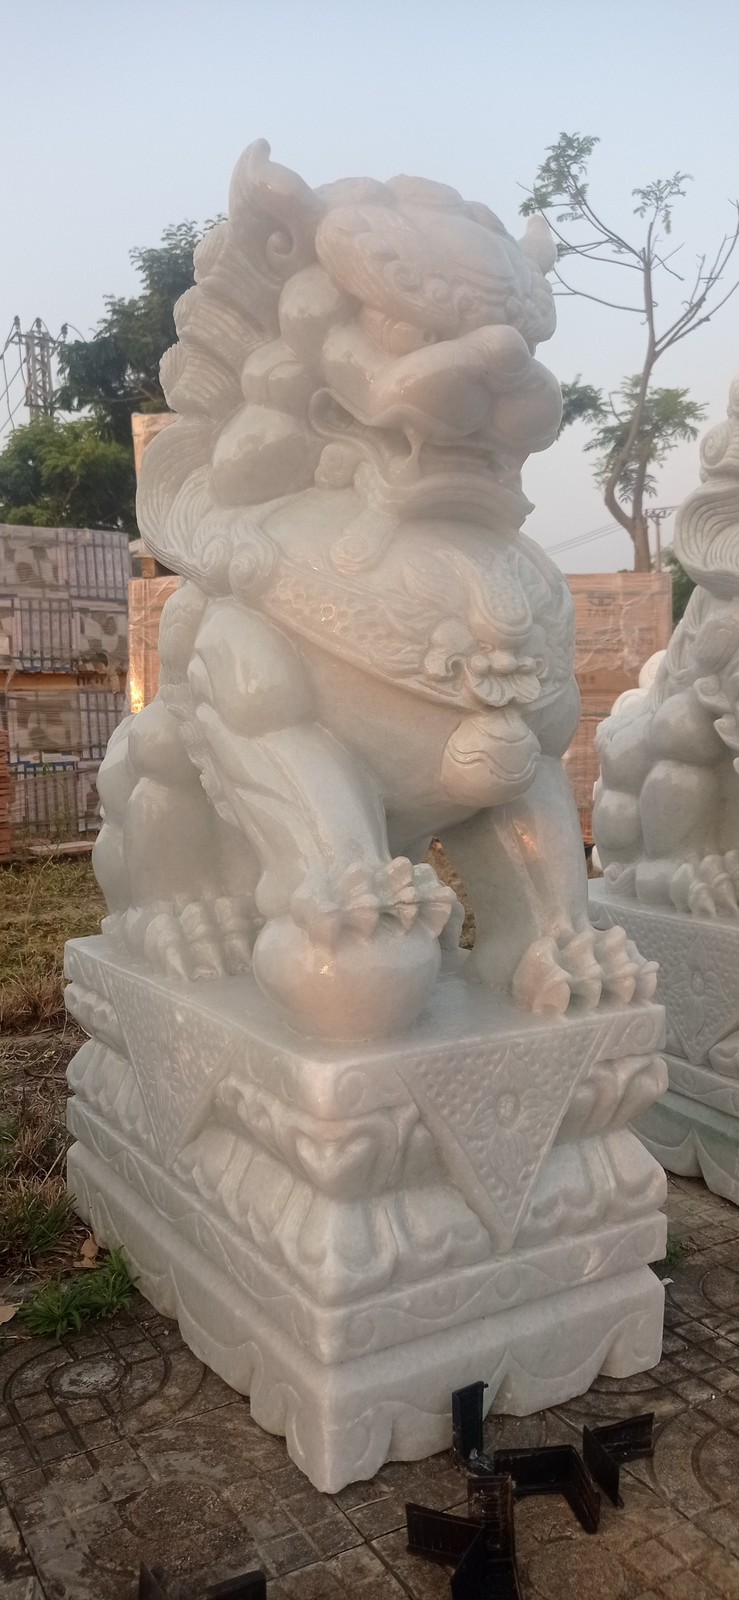 Foodog-Stone Lion-Ying Yang-Fengshui-Marble Lion-Stone Foodogs Statue - $12,250.00